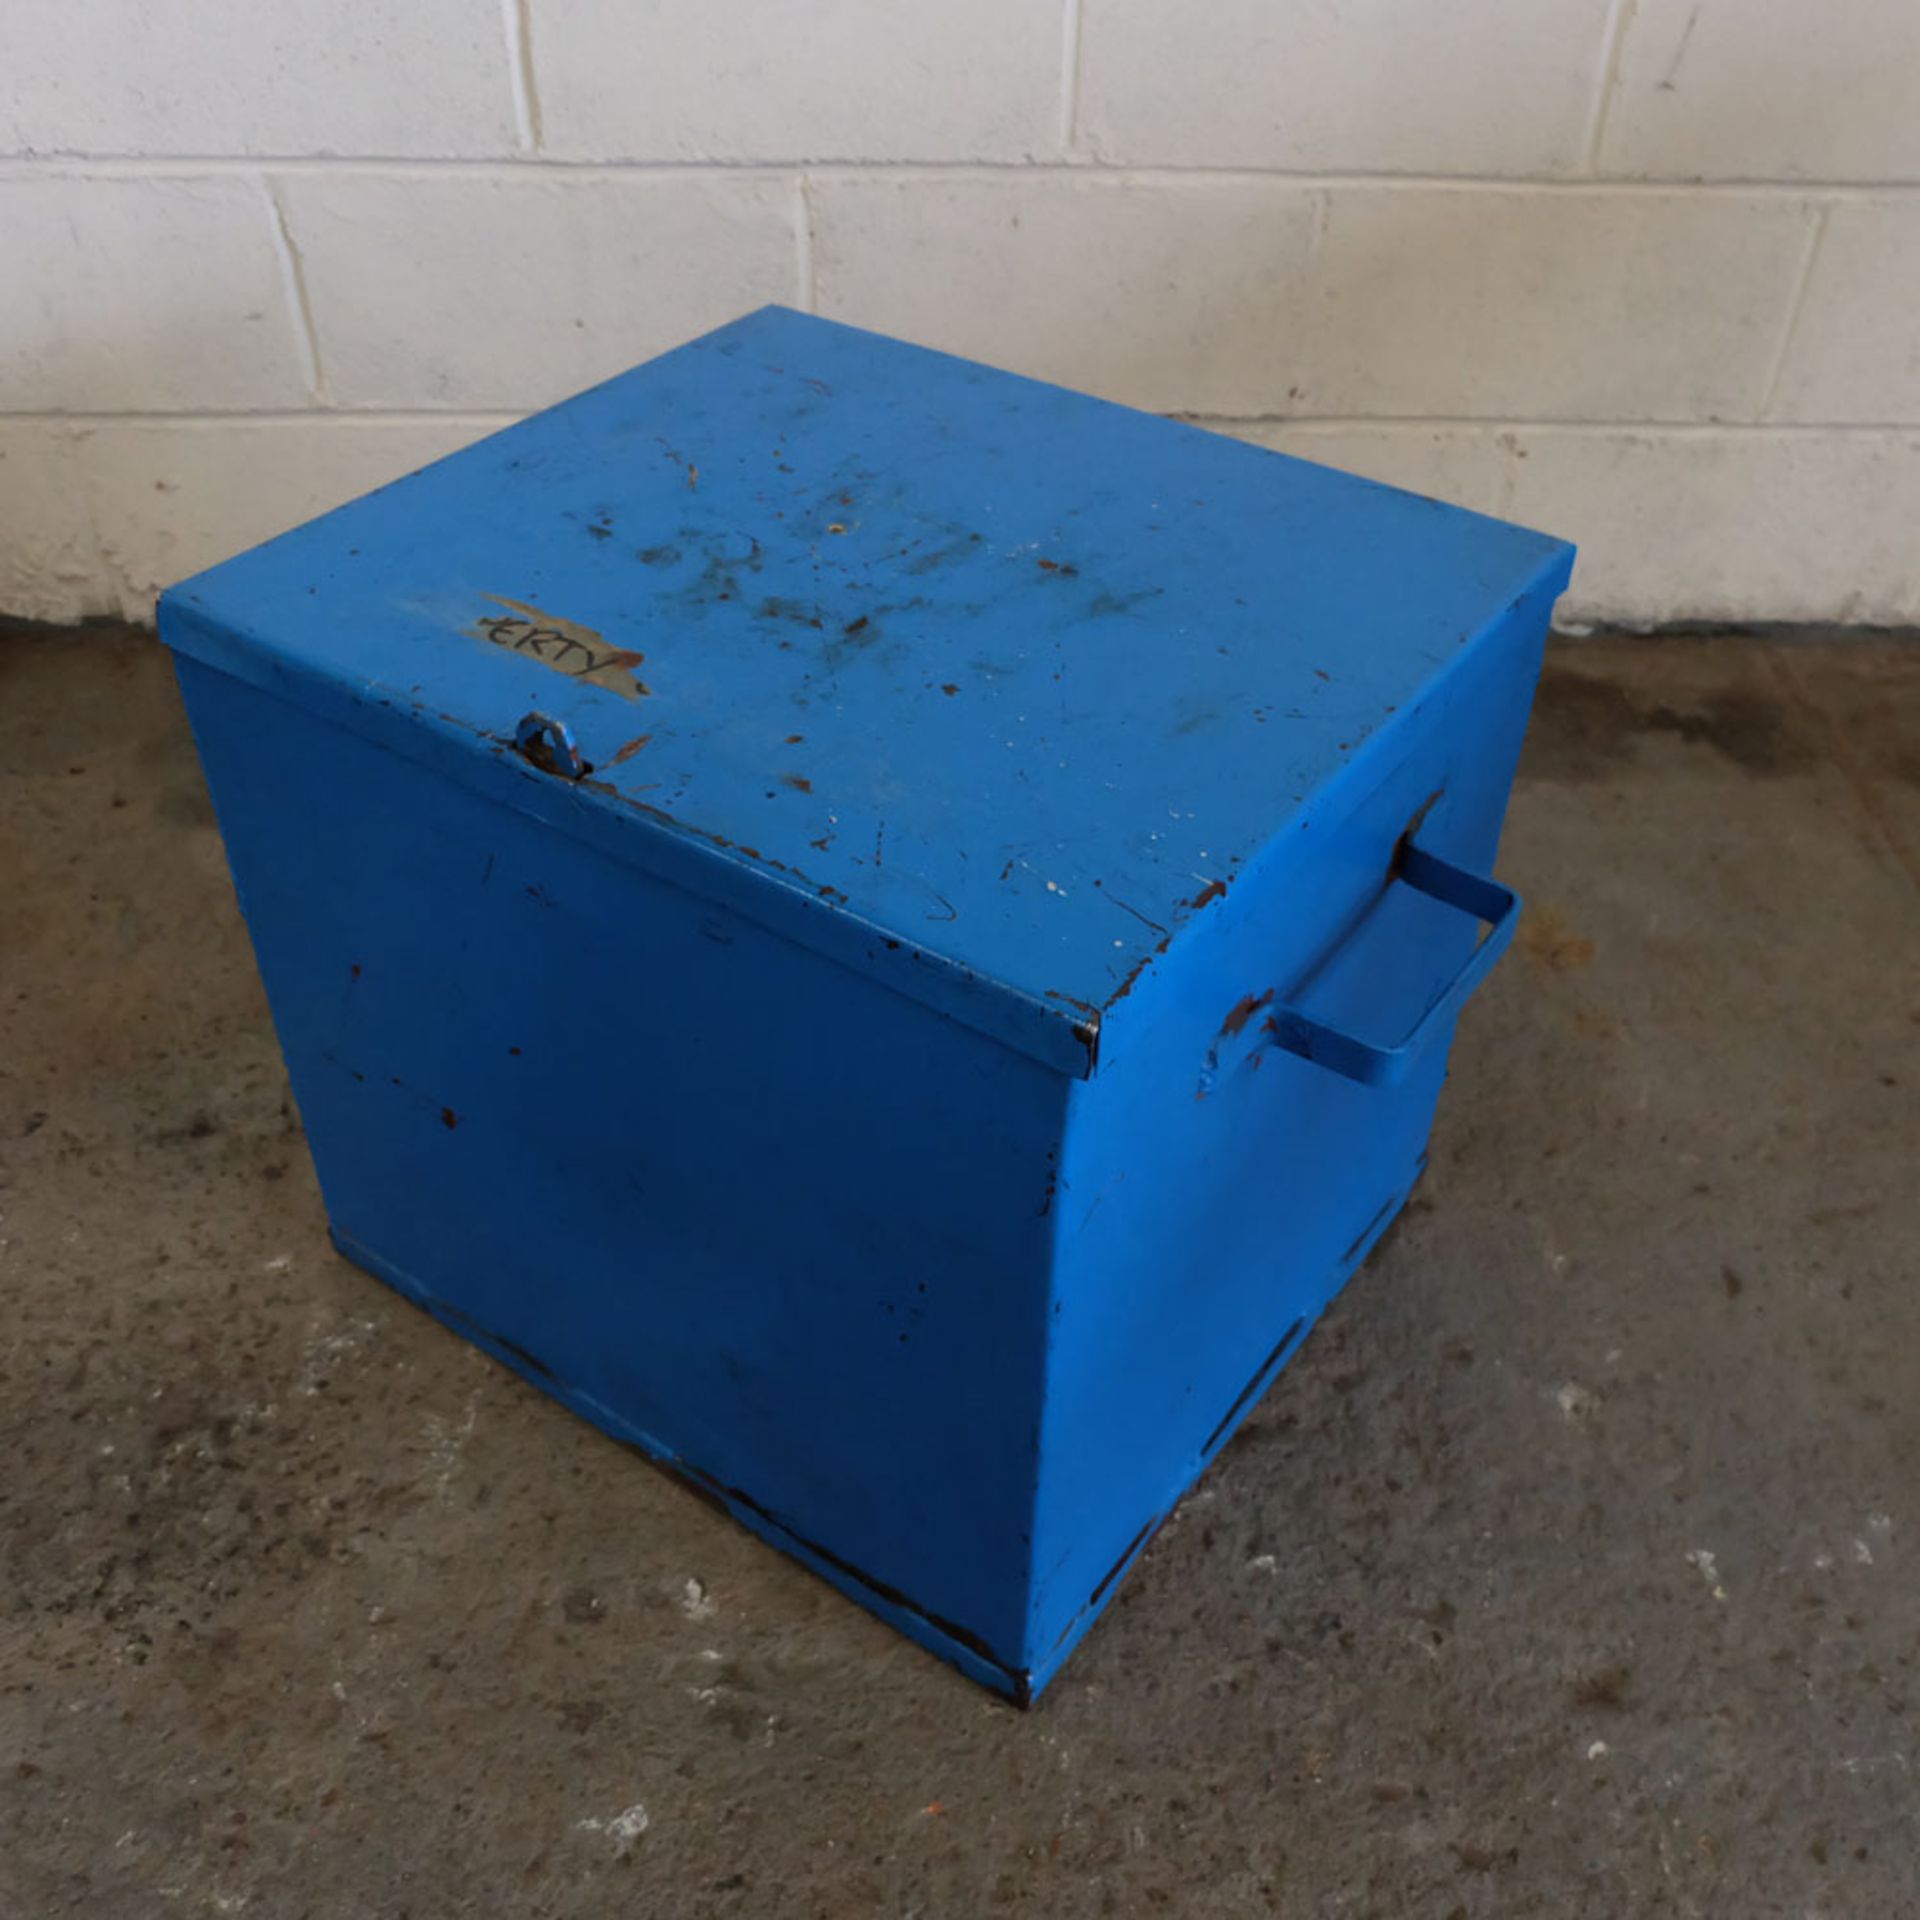 Steel Storage Box. Approx Size 22 1/2" x 20" x 20 1/2" High. - Image 5 of 5